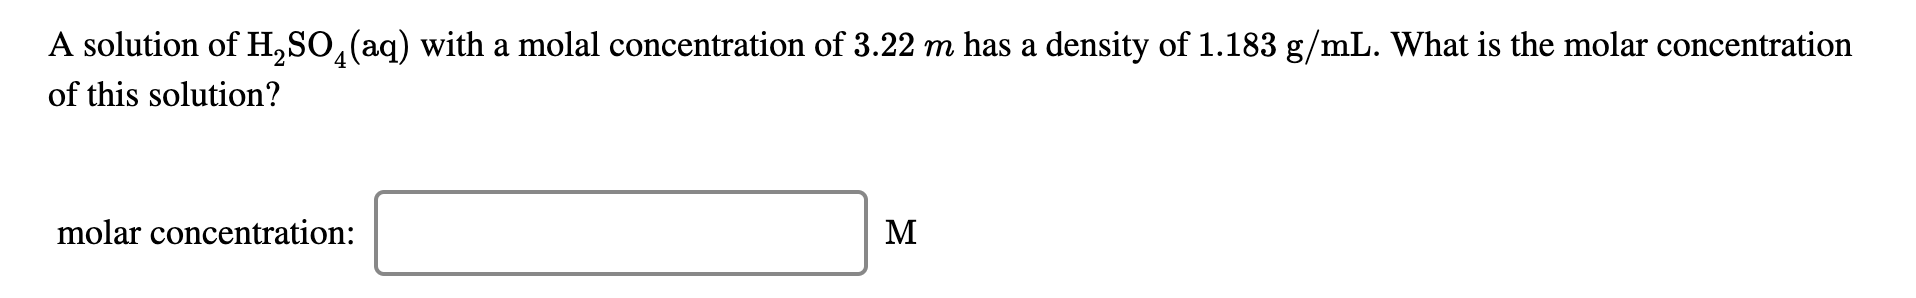 A solution of H,SO,(aq) with a molal concentration of 3.22 m has a density of 1.183 g/mL. What is the molar concentration
of this solution?
molar concentration:
M
